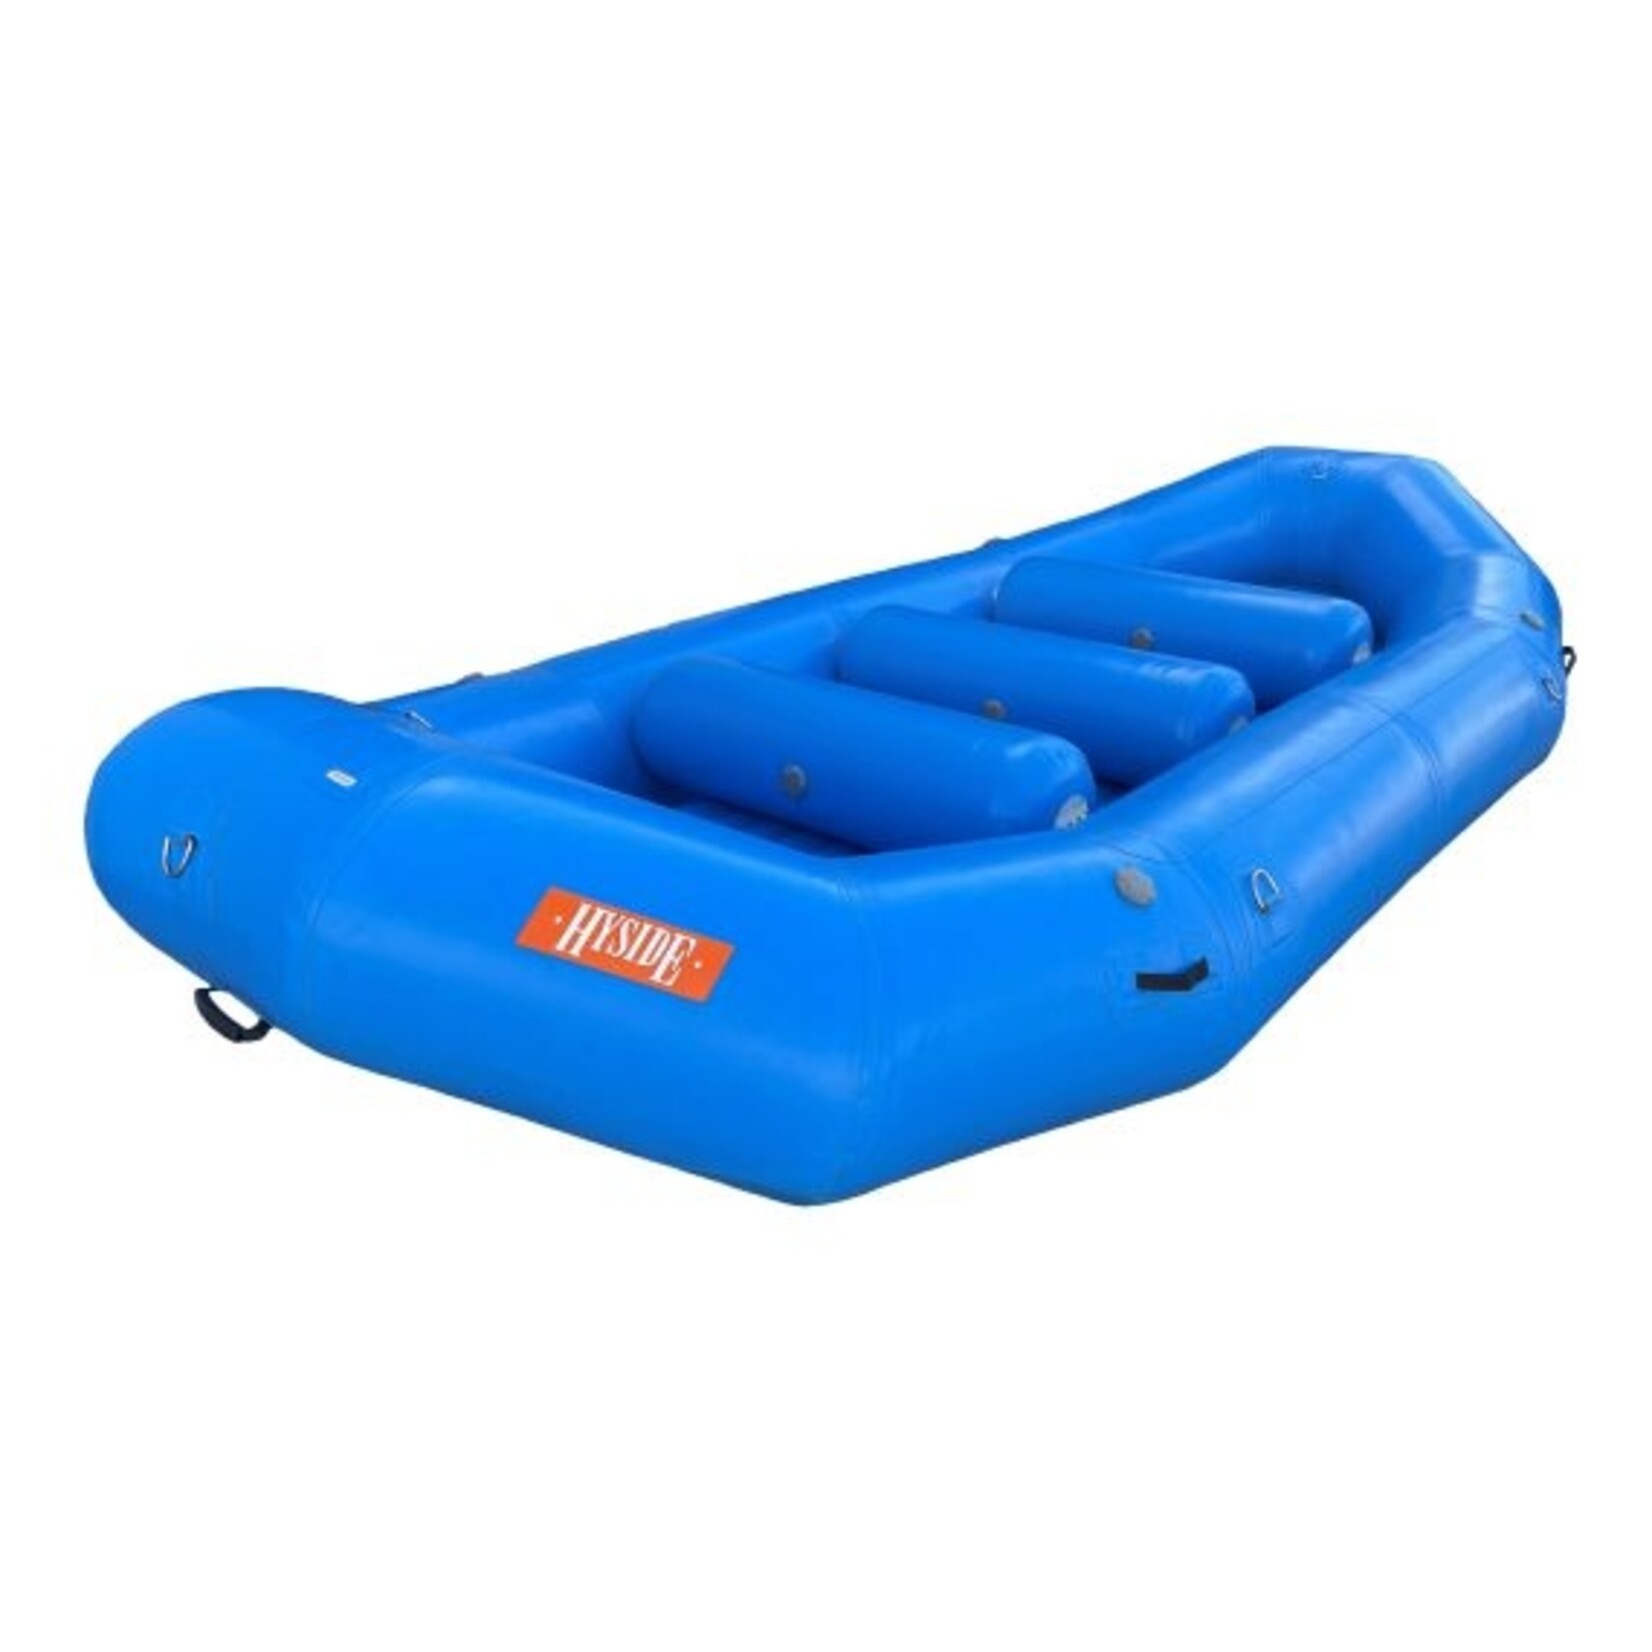 Hyside Inflatables Hyside Outfitter 14.0